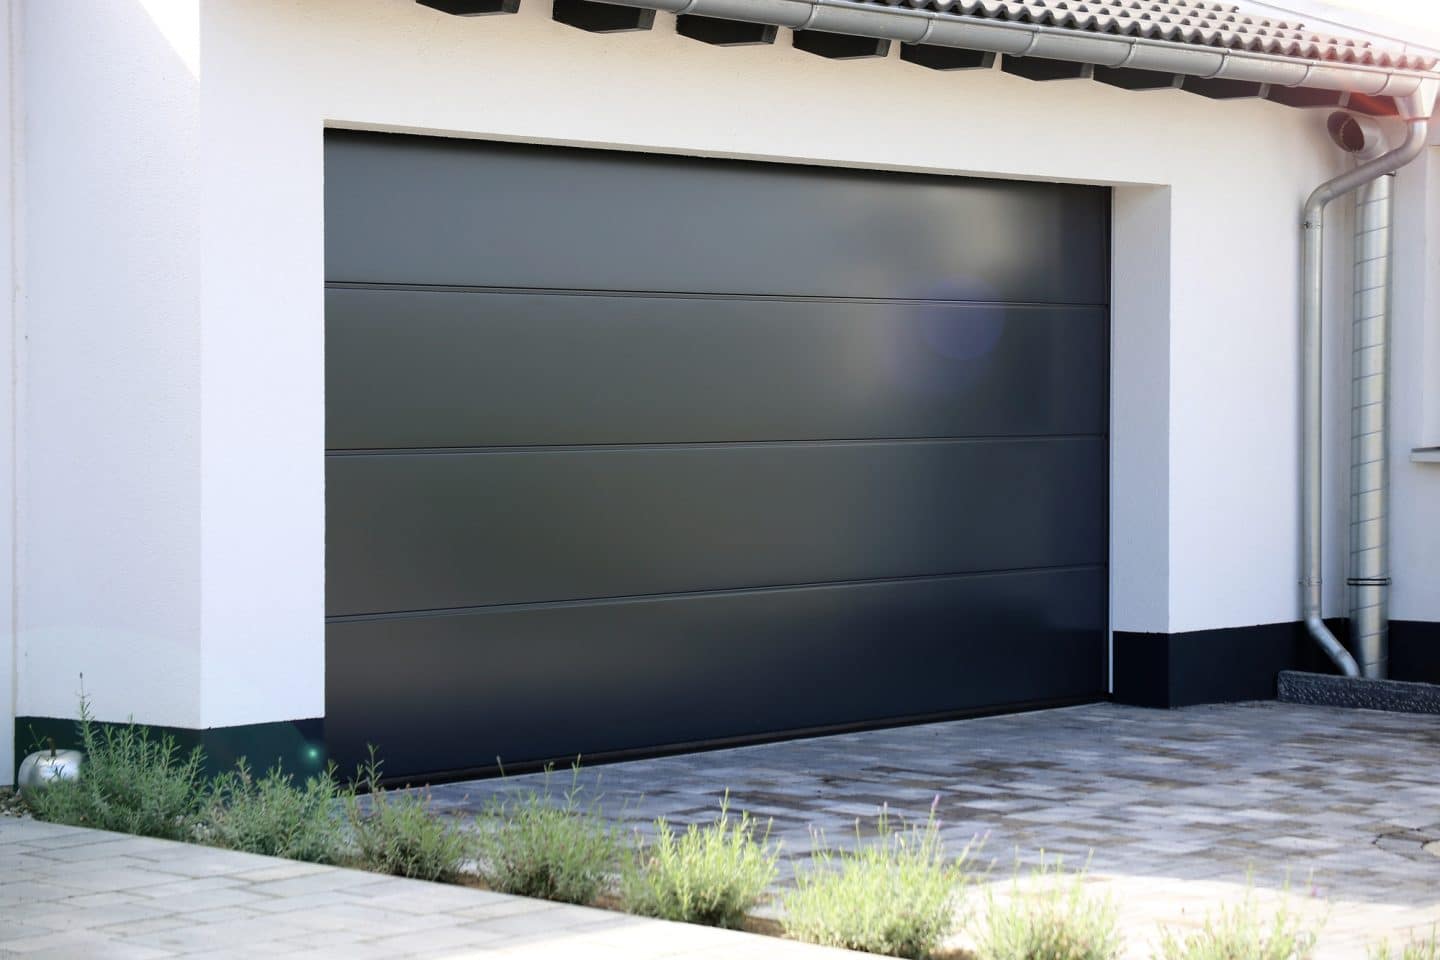 The Garage Door Opener: How It Works and Why You Need a Good One